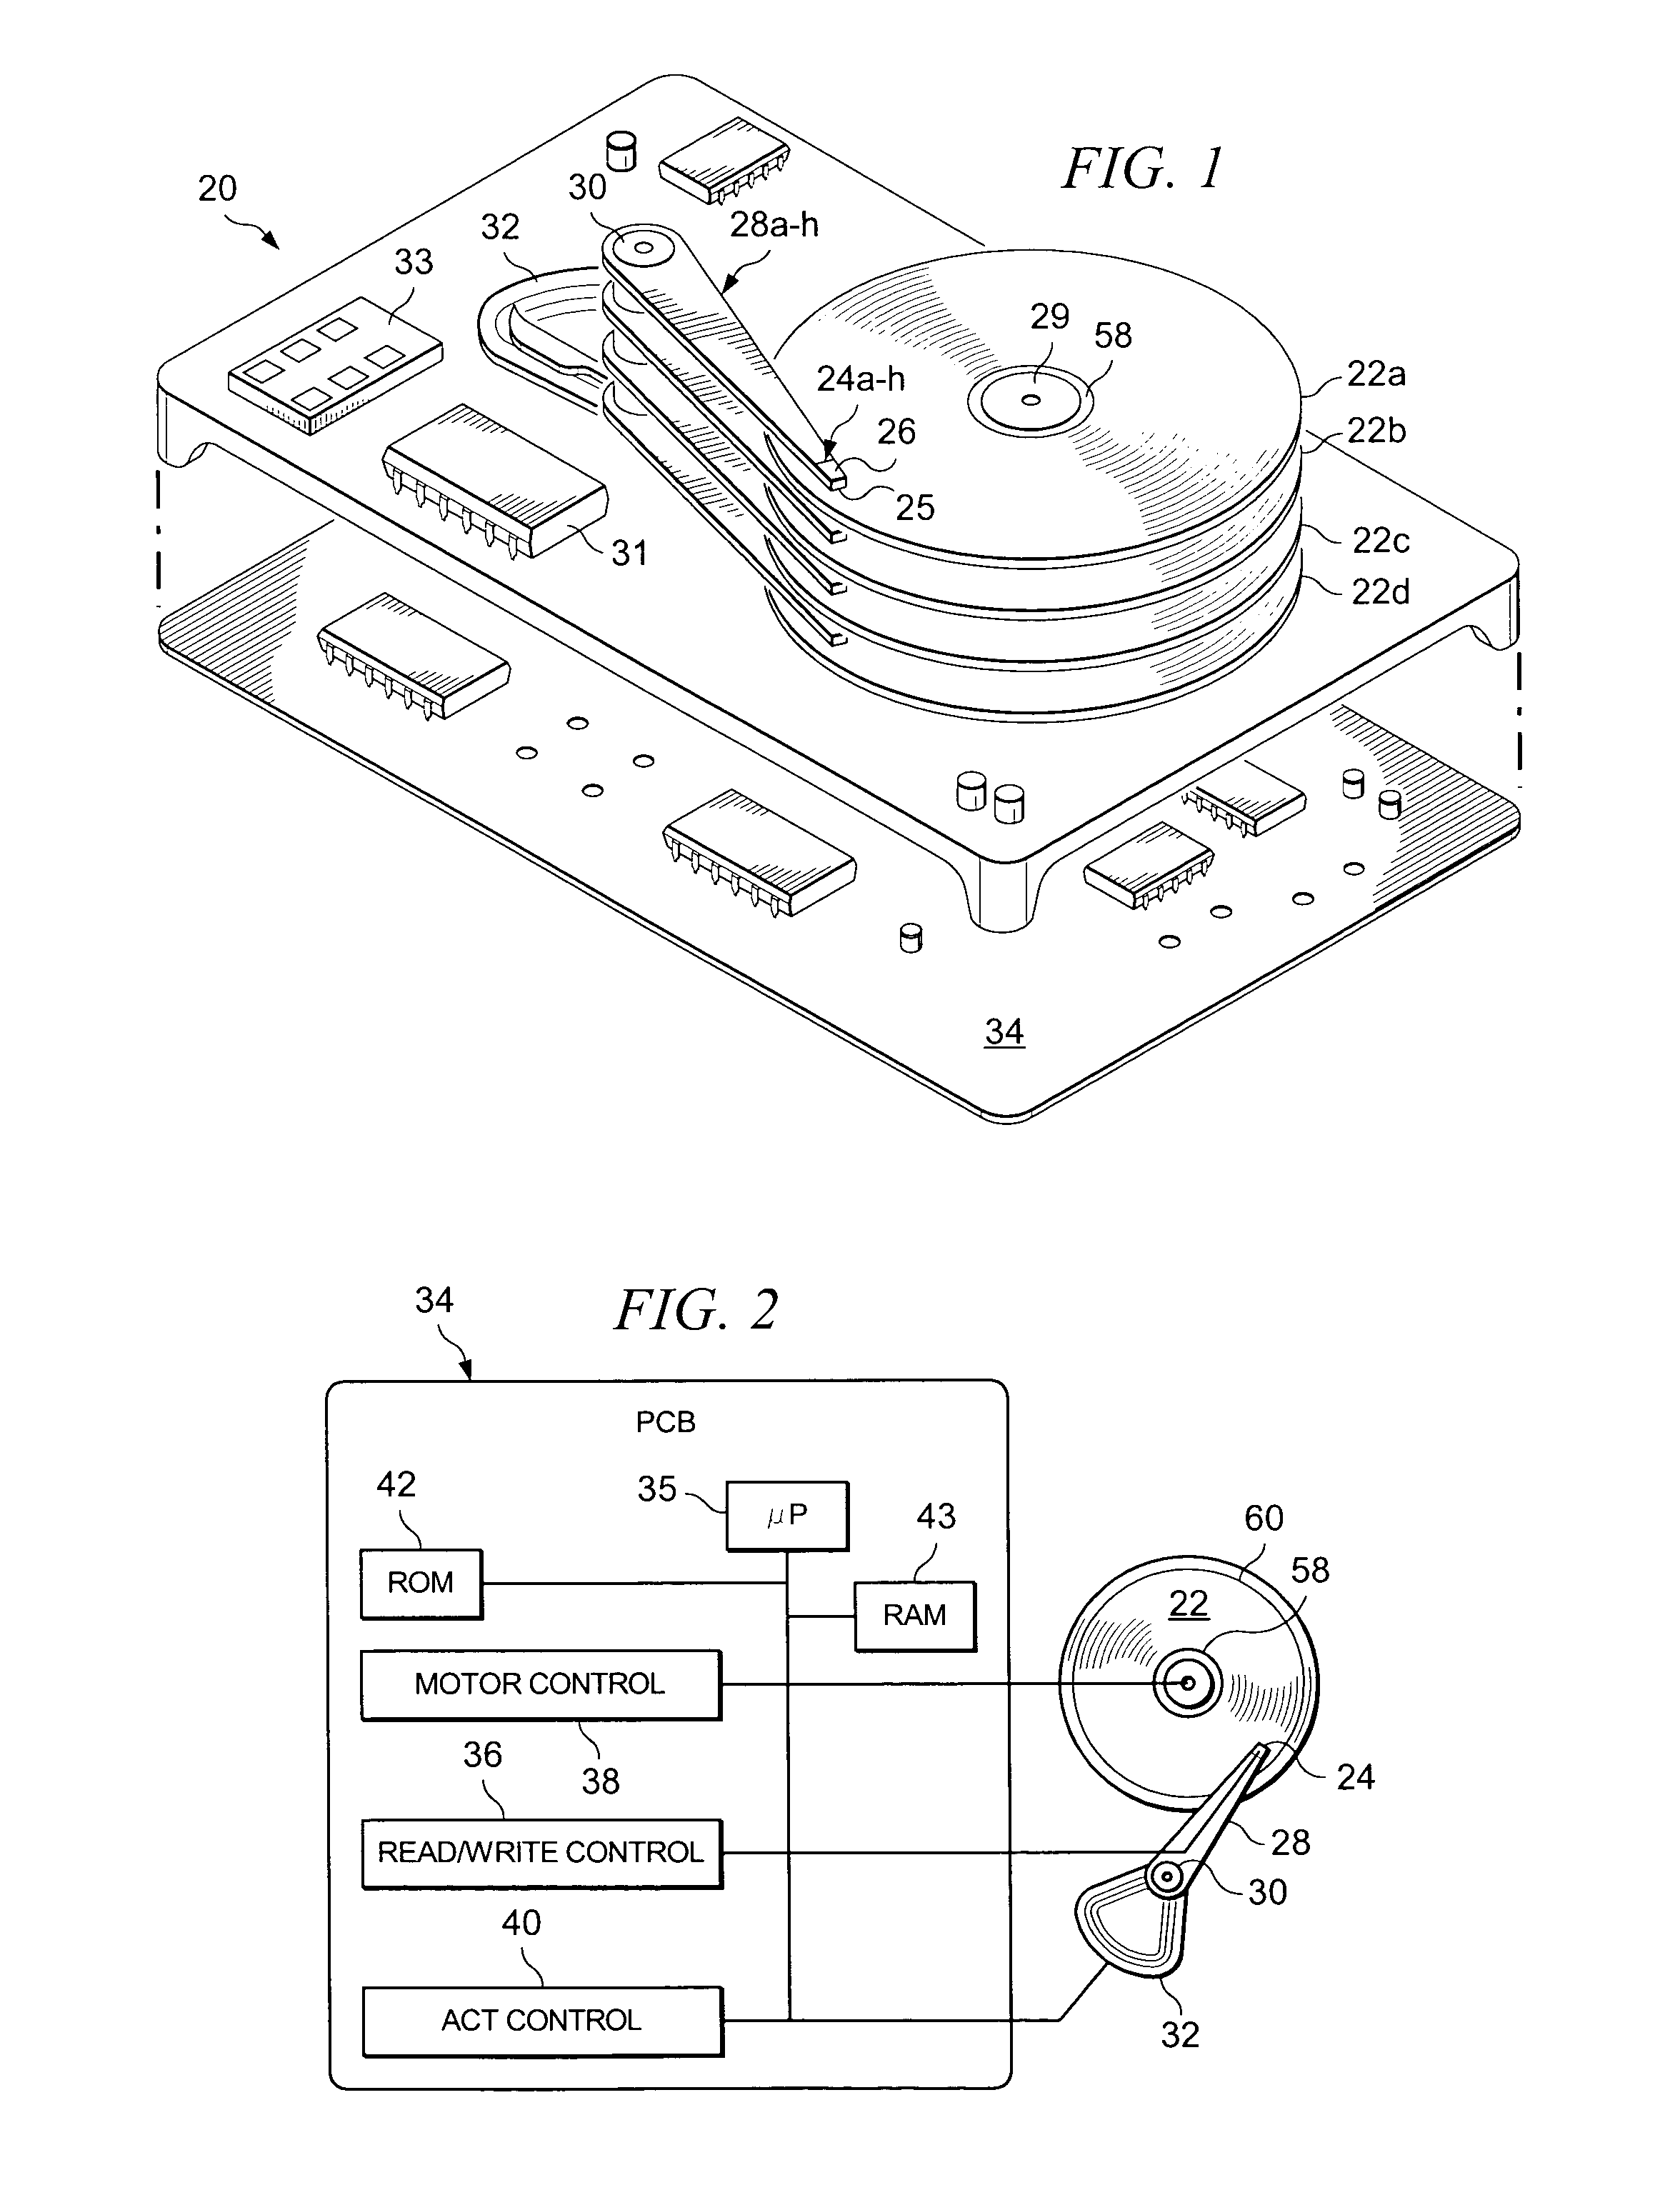 Efficient notch coefficient computation for a disc drive control system using fixed point math